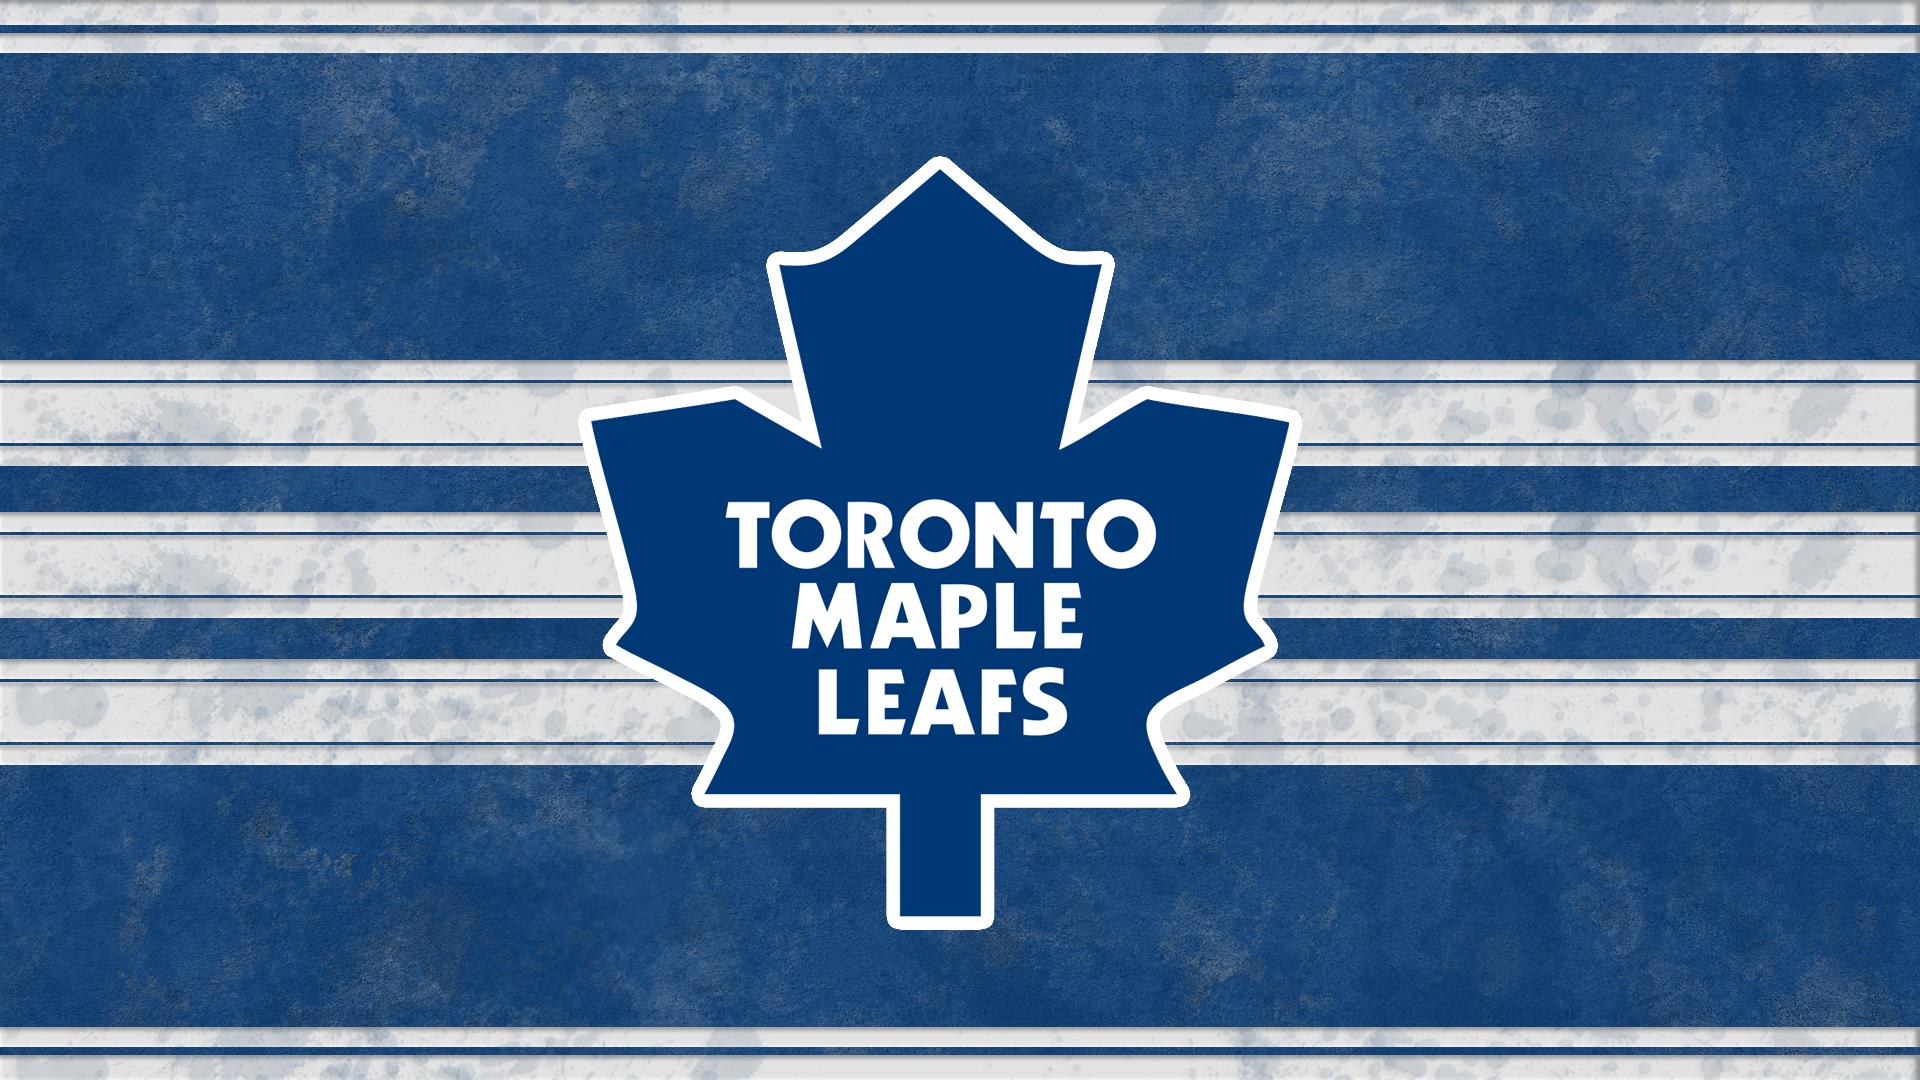 Toronto Maple Leafs Wallpapers 2015 - Wallpaper Cave